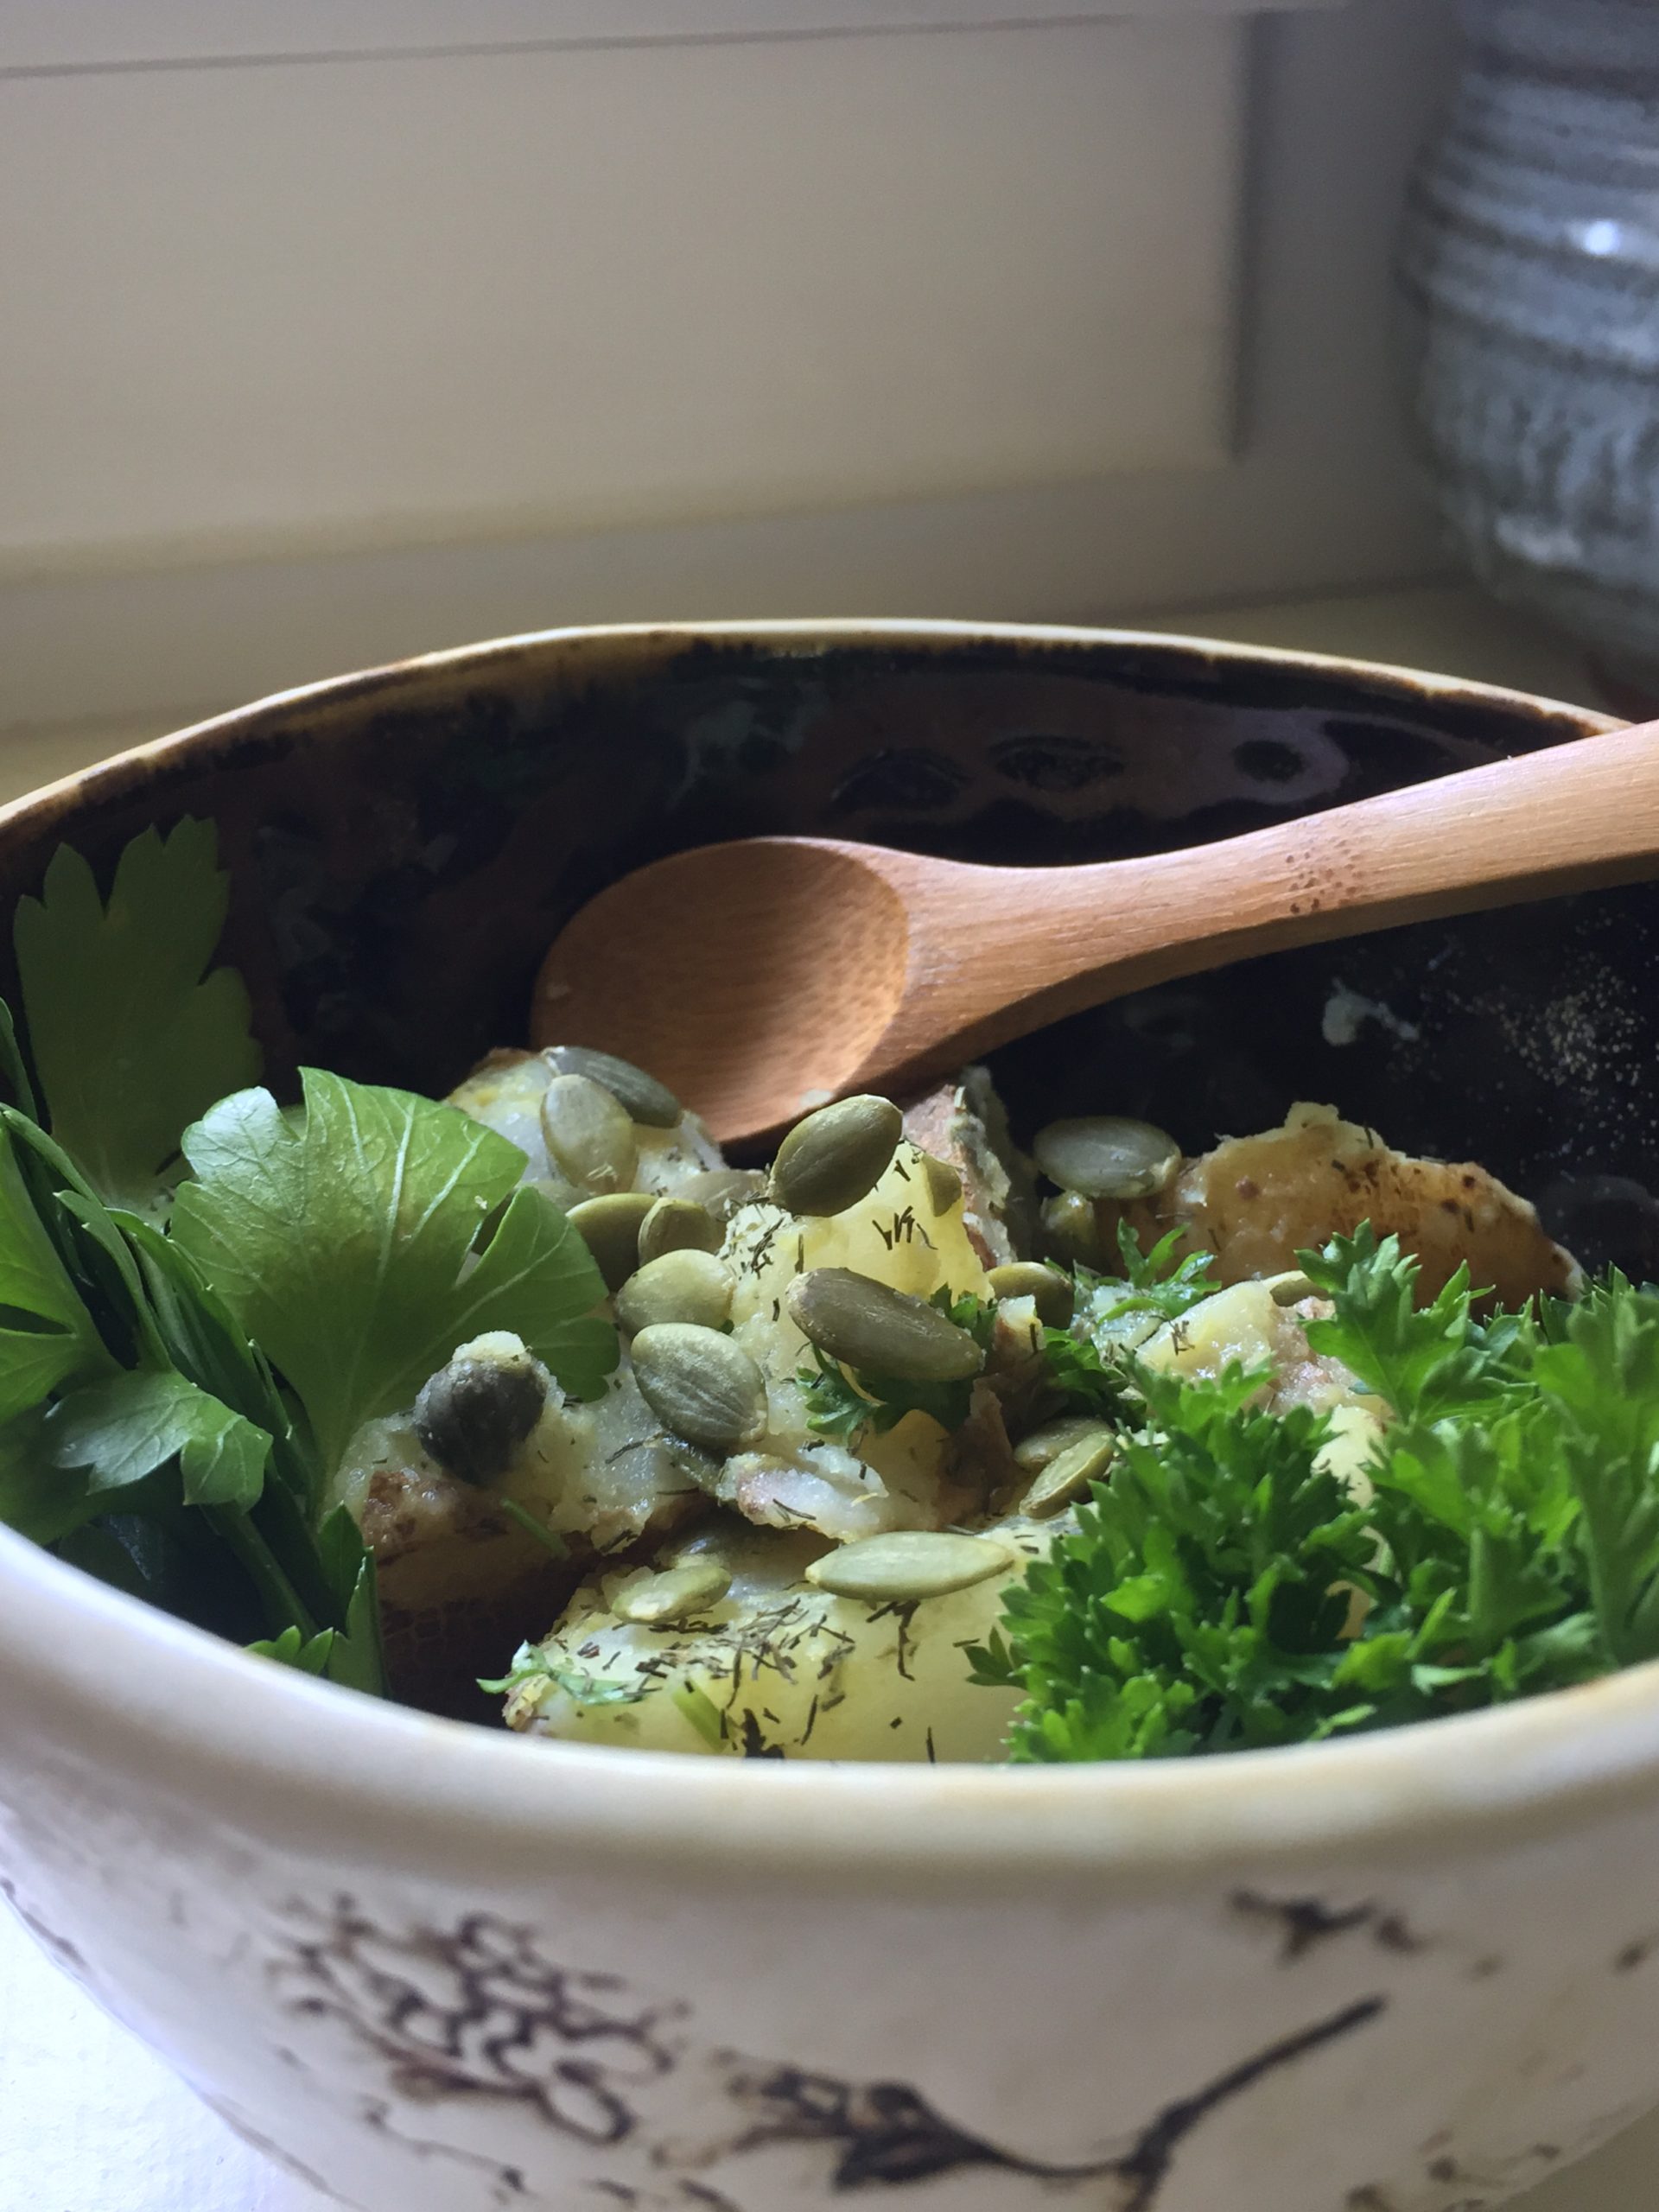 potato salad in a bowl with a wooden spoon